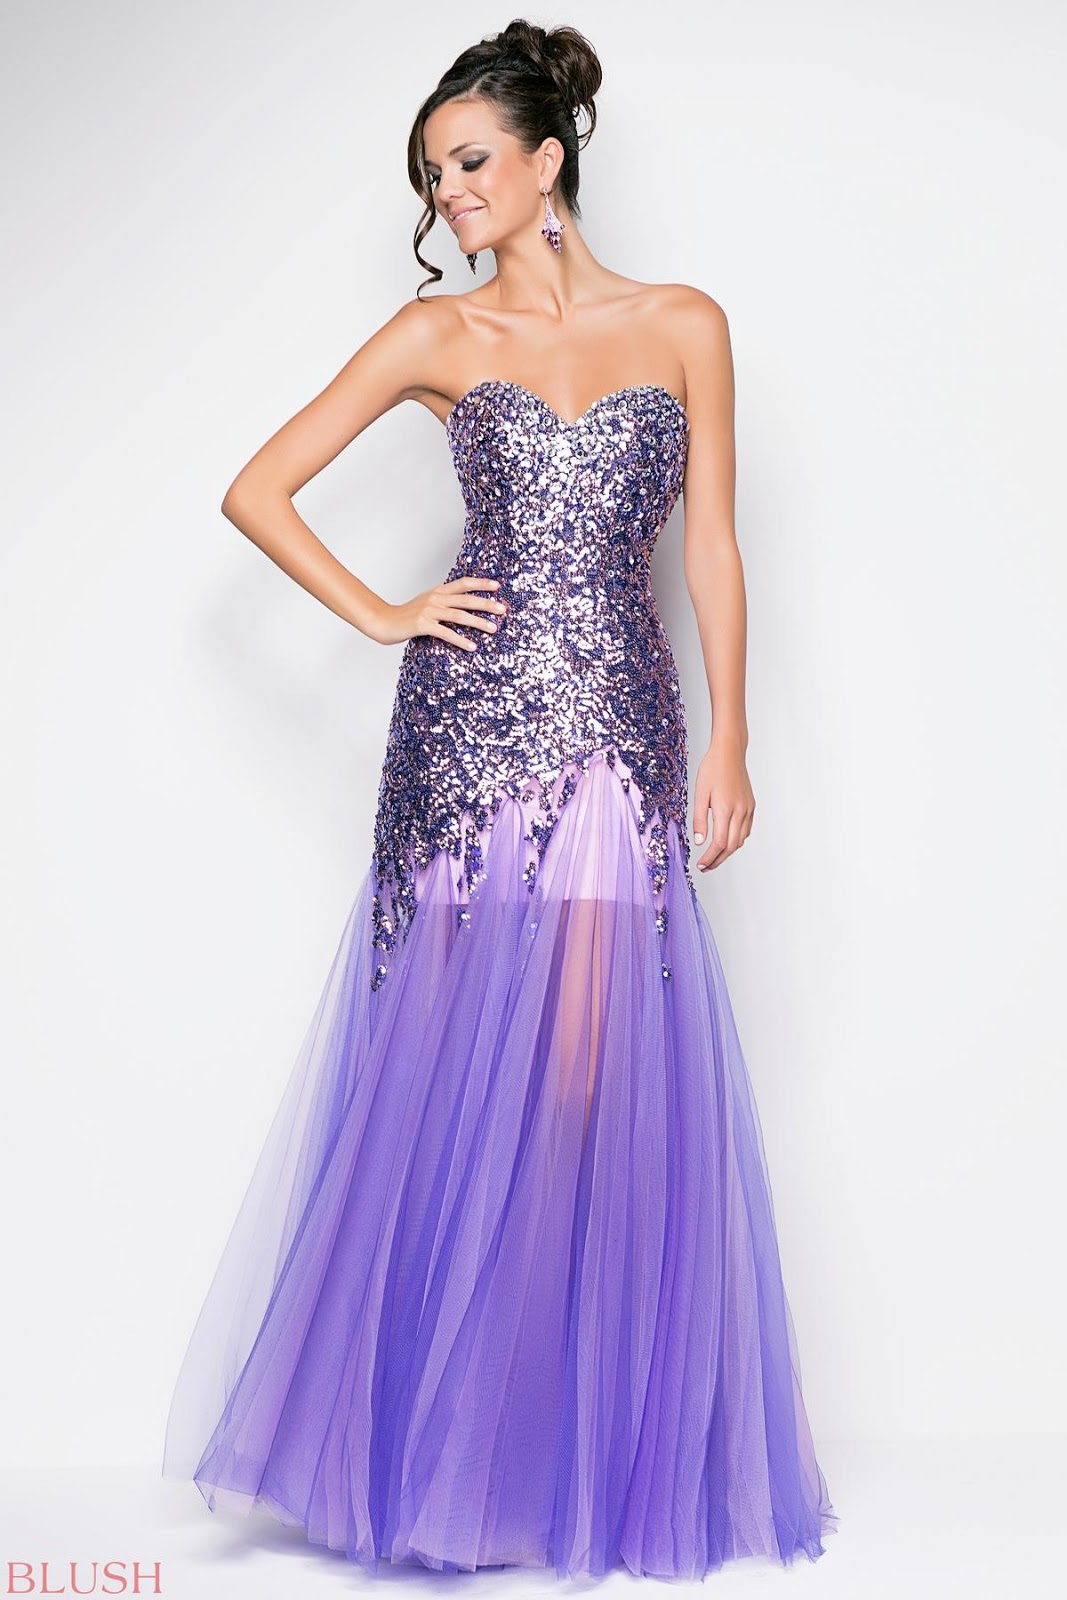 Fashion And Stylish Dresses Blog: 2013 Prom Dresses Collection From ...